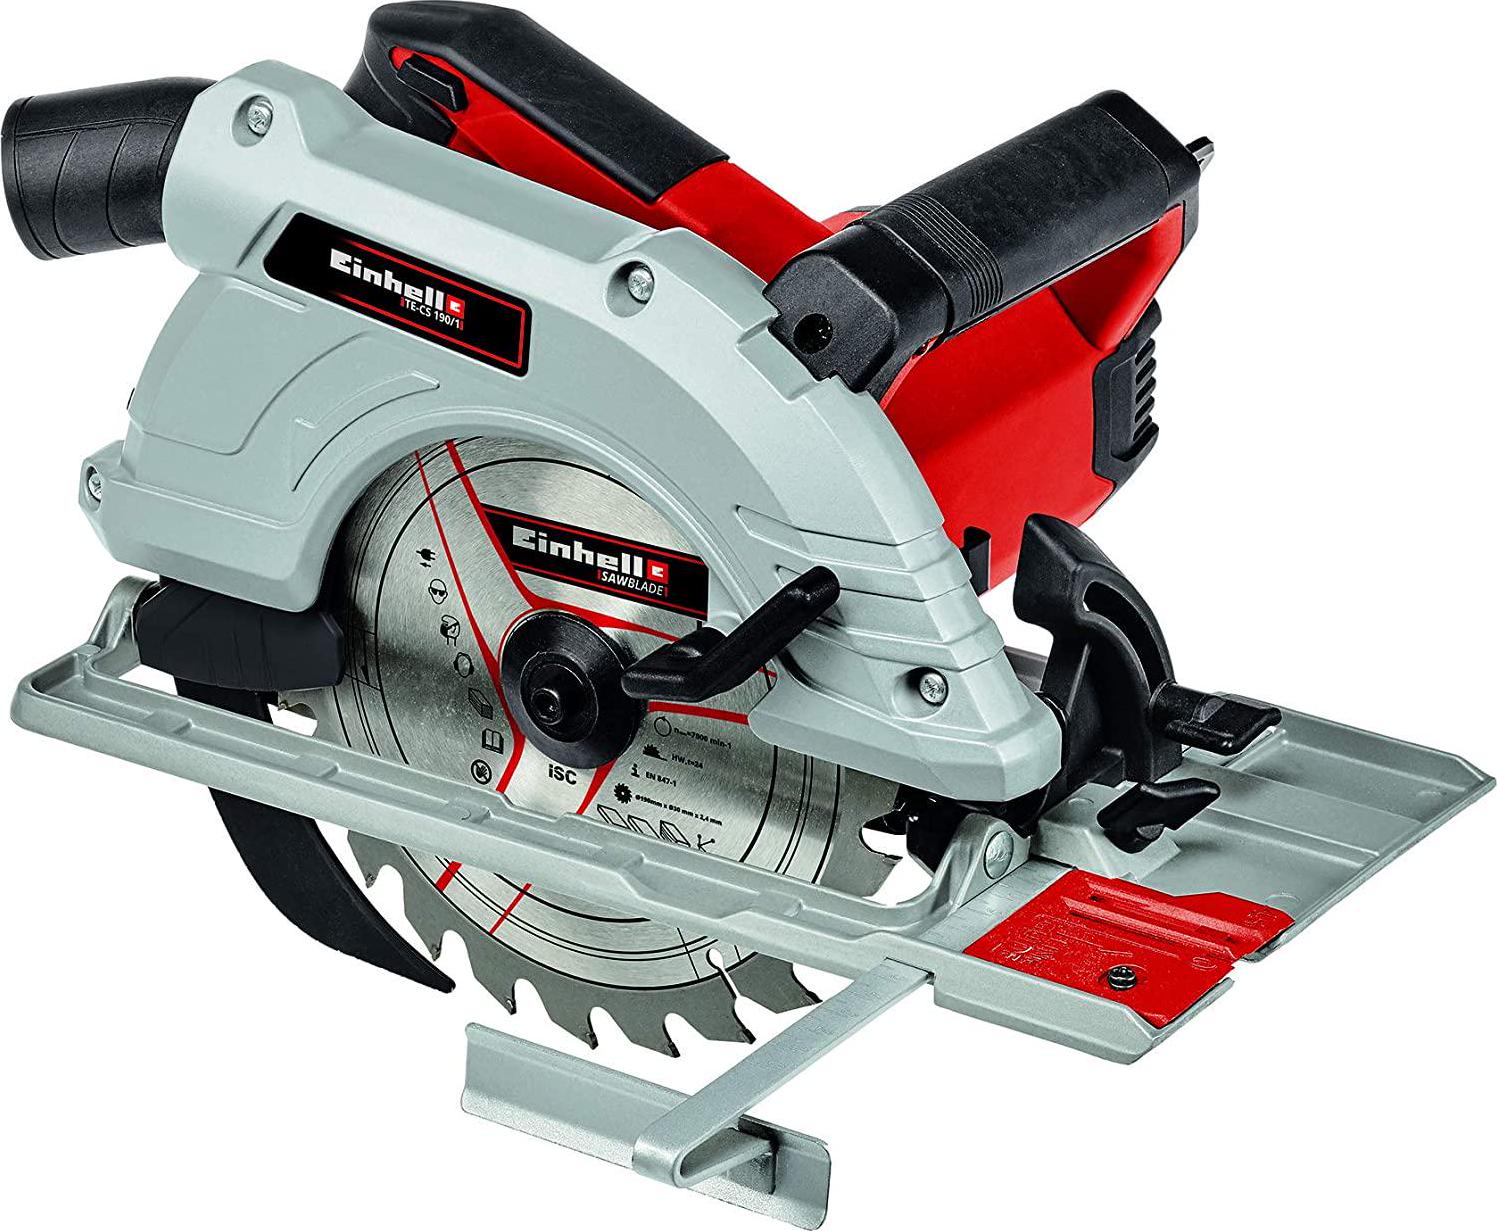 Einhell, Einhell 4331005 Hand-Held Circular Saw (1500W, 5500 rpm, tool-Free Adjustment, Large Handle, Aluminium Saw Table, Spindle Locking System, Including Carbide-Tipped Saw Blade), 23.3 cm*37.4 cm*24.2 cm